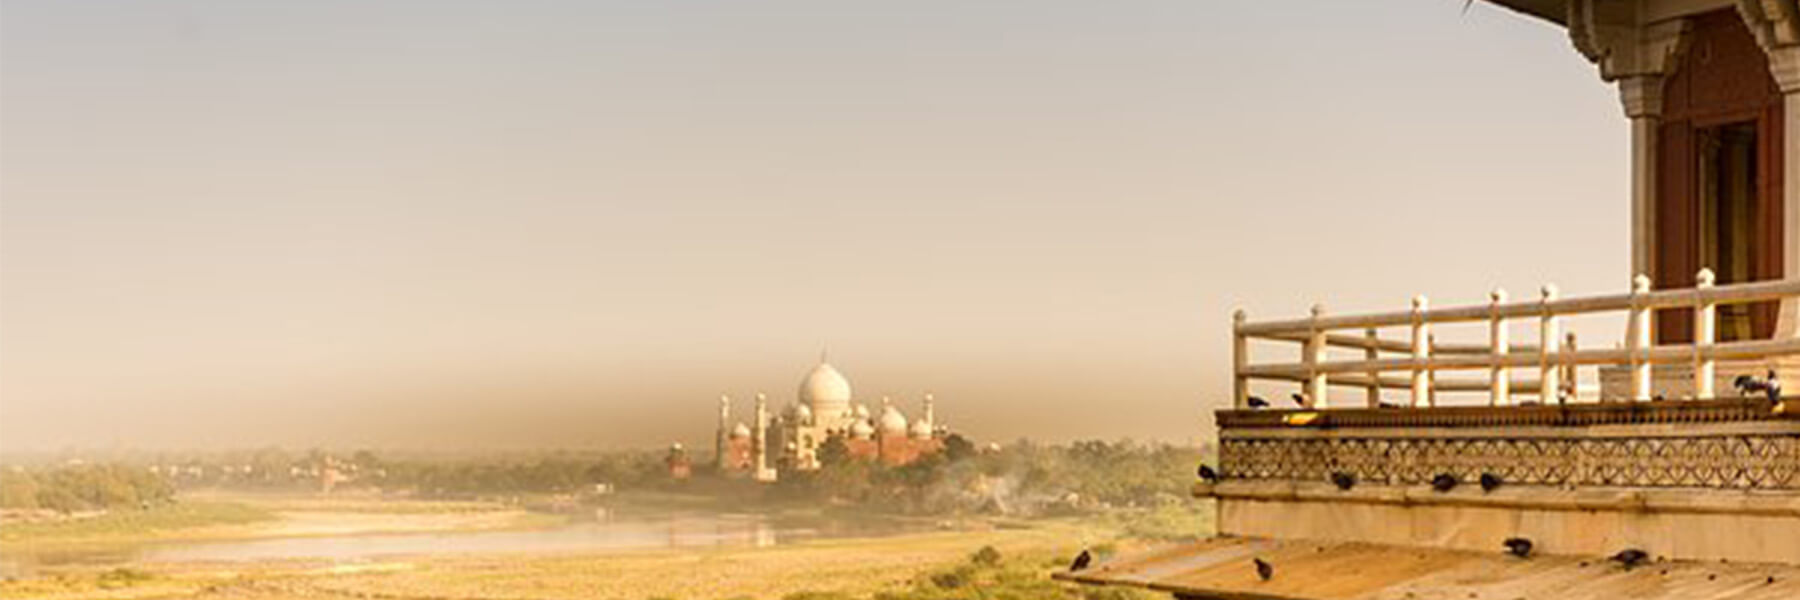 The Taj Mahal viewed from a distance